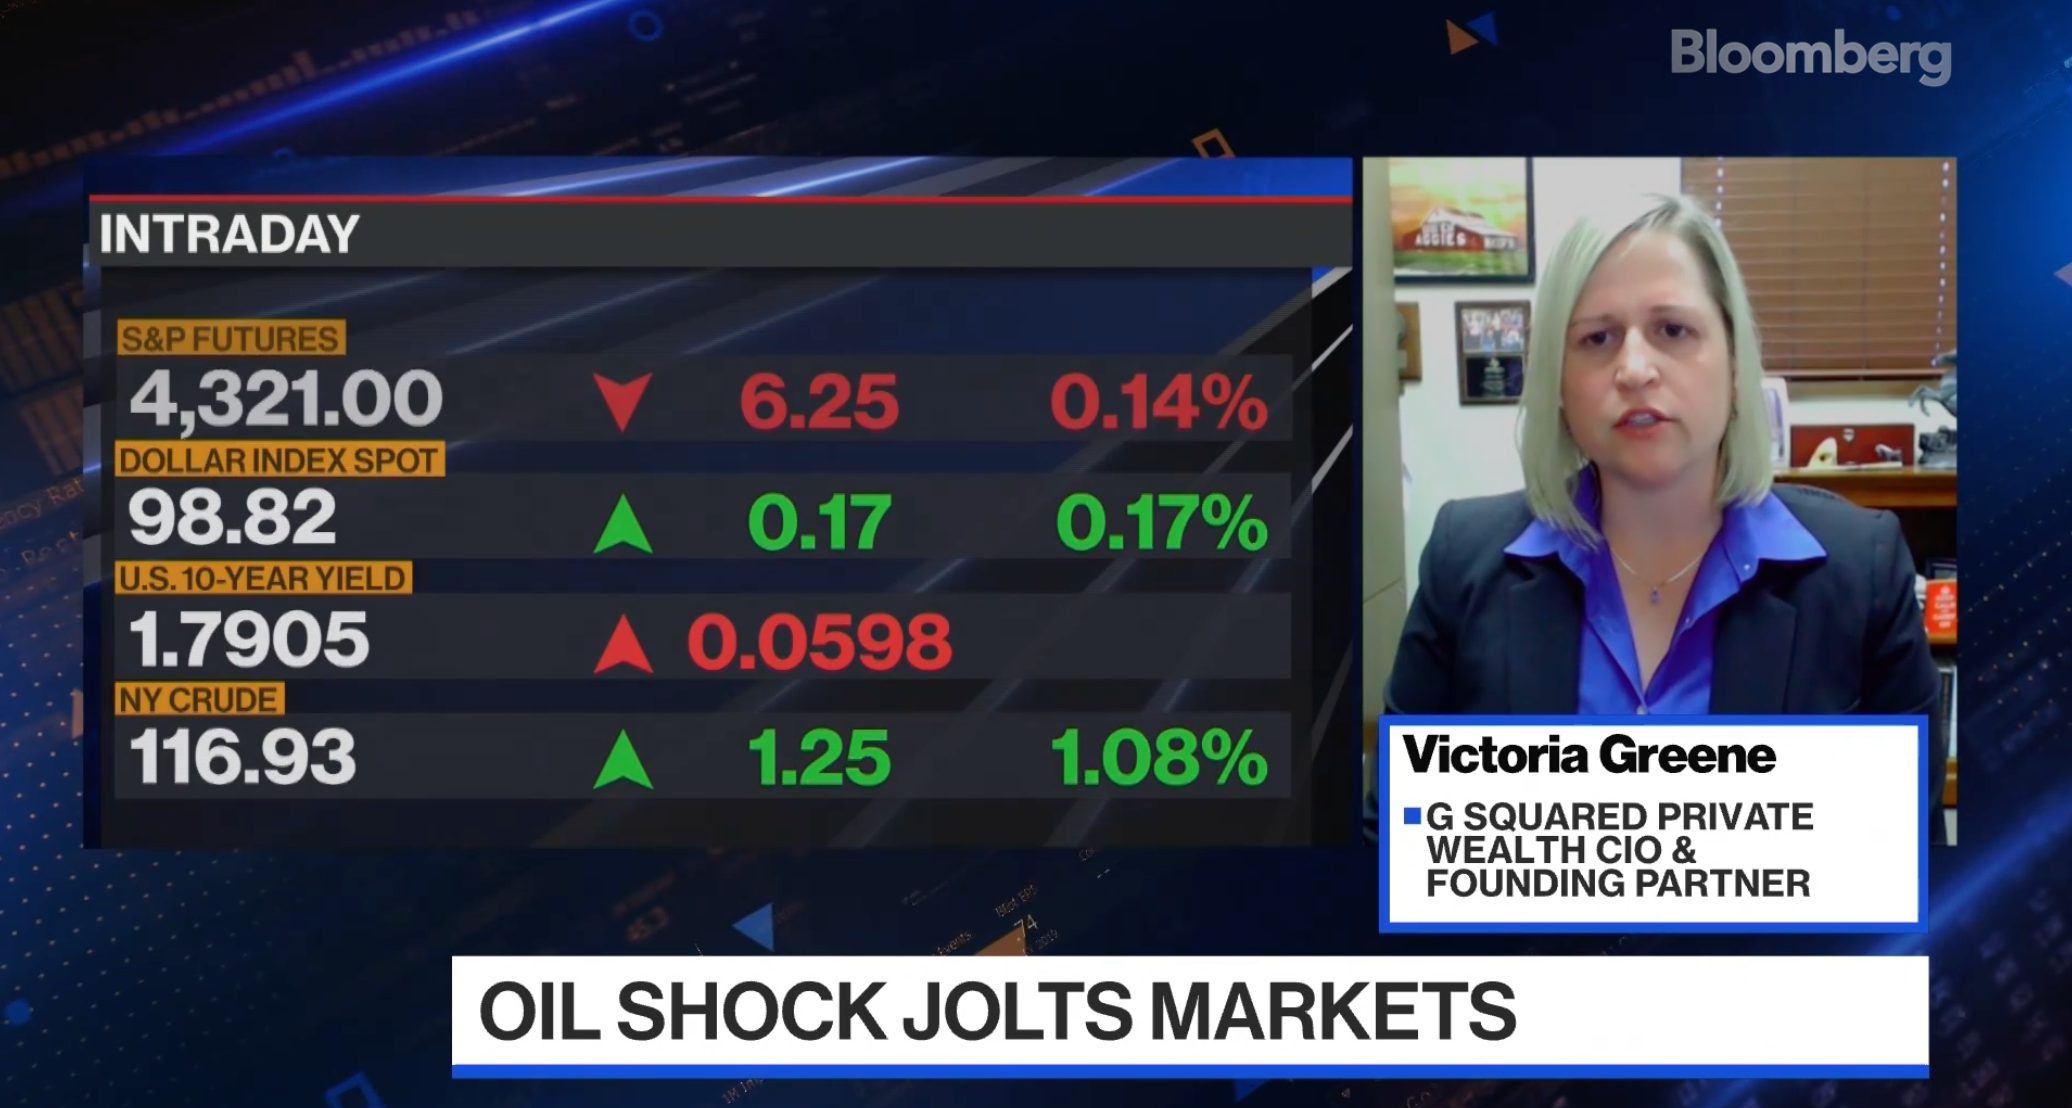 Victoria on Bloomberg "The Open"